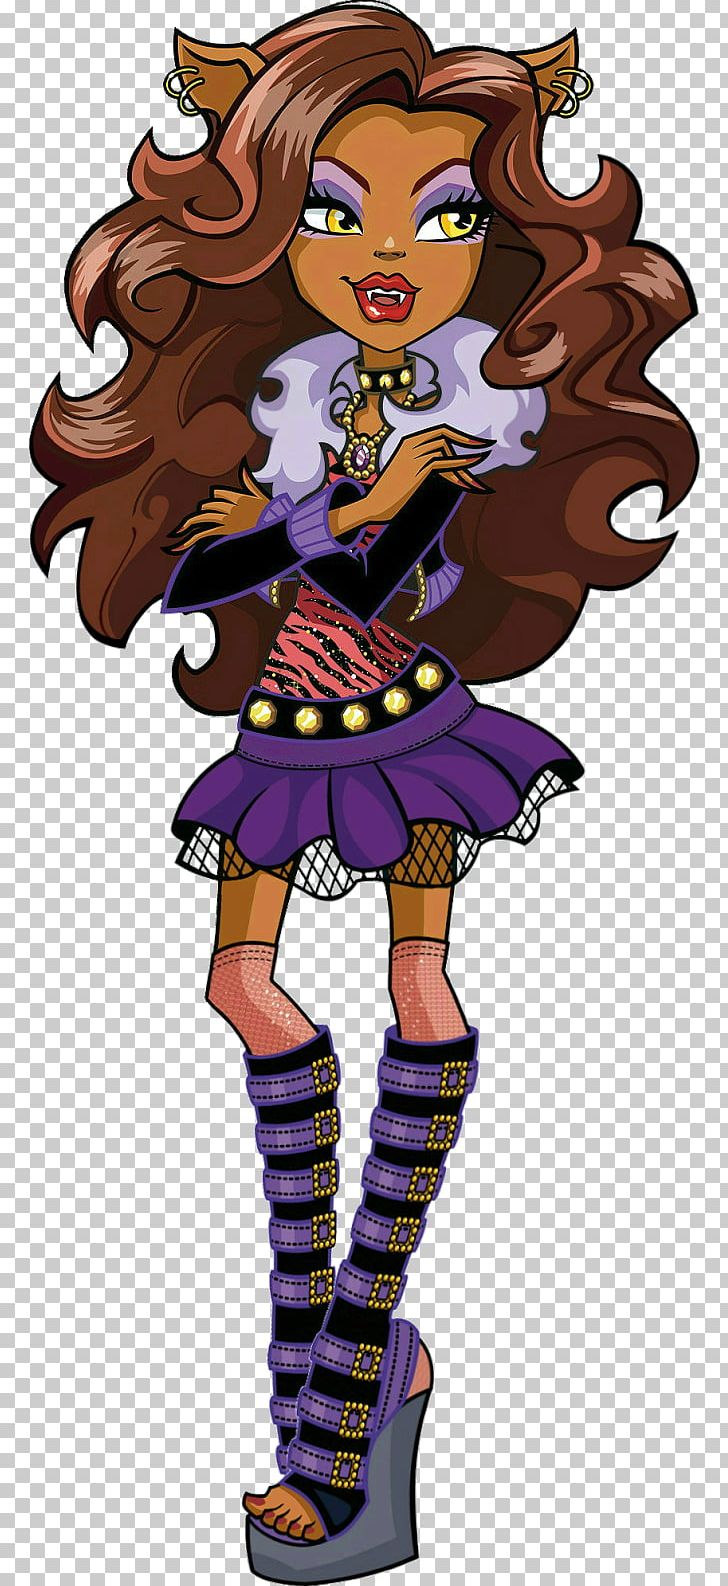 Monster High Clawdeen Wolf Doll Monster High Original Gouls CollectionClawdeen Wolf Doll Frankie Stein PNG, Clipart, Bratz, Cartoon, Doll, Fashion, Fictional Character Free PNG Download